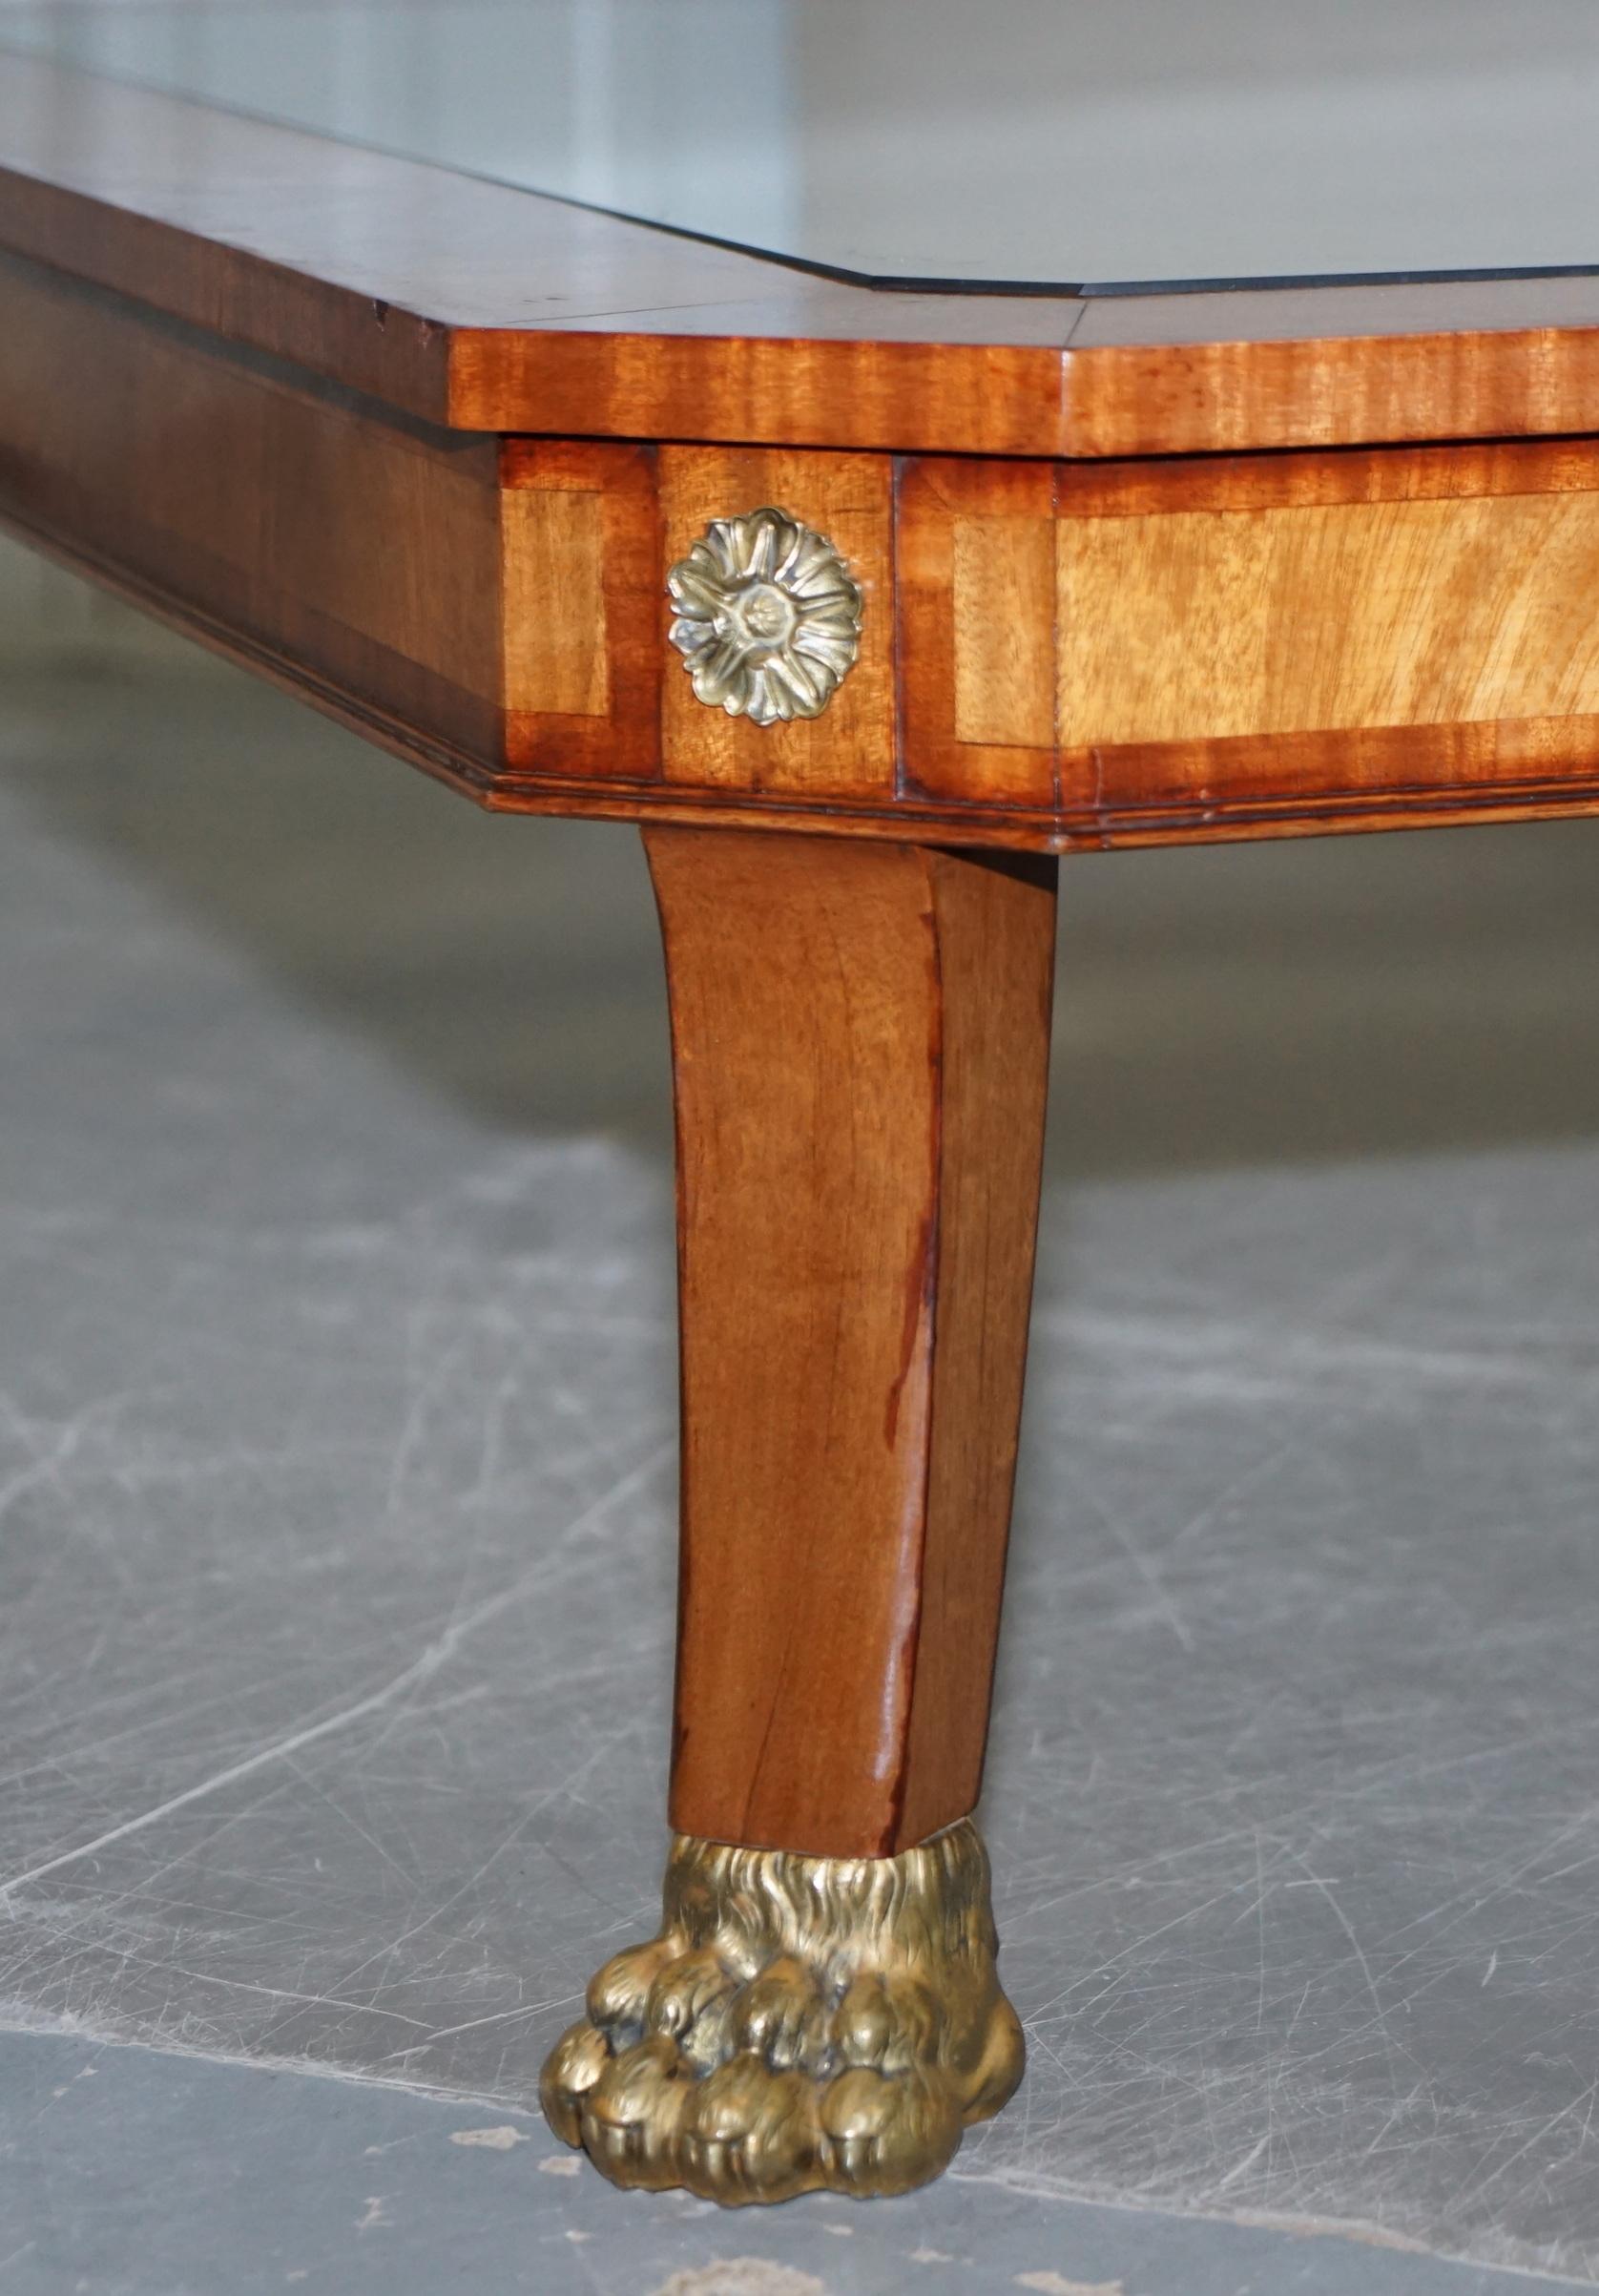 We are delighted to offer for sale this very large flamed mahogany coffee or cocktail table with gilt bronze Lion's Hairy Paw feet

A very nicely made table, its extremely high quality, the glass top is bevelled safety glass, the feet are gold